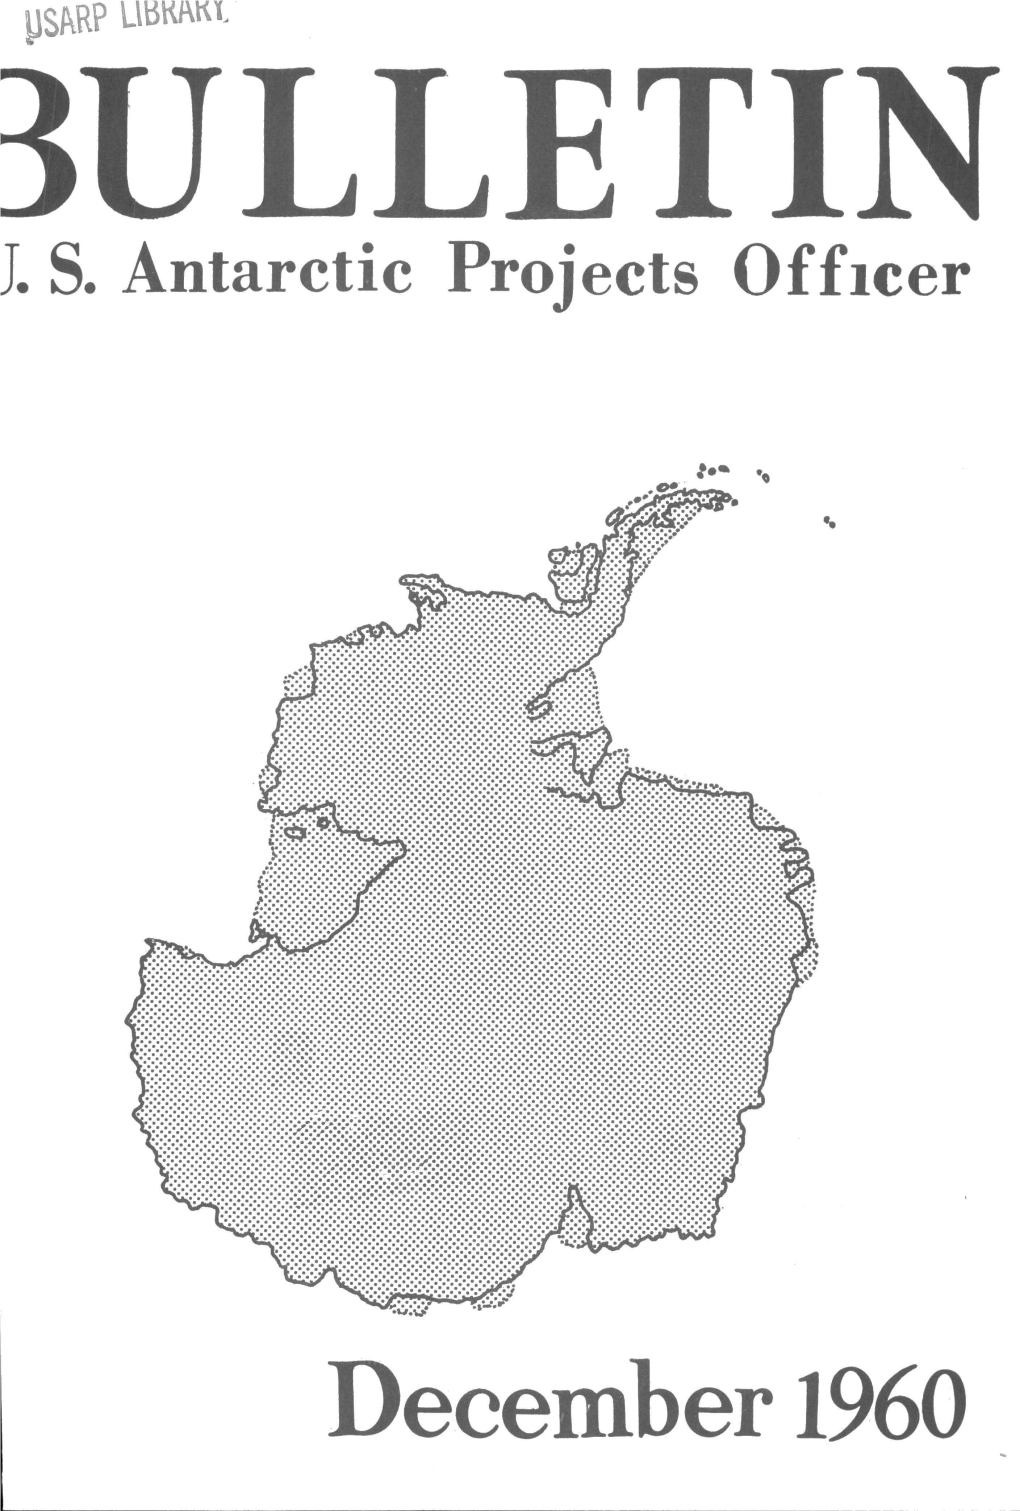 JS Antarctic Projects Officer